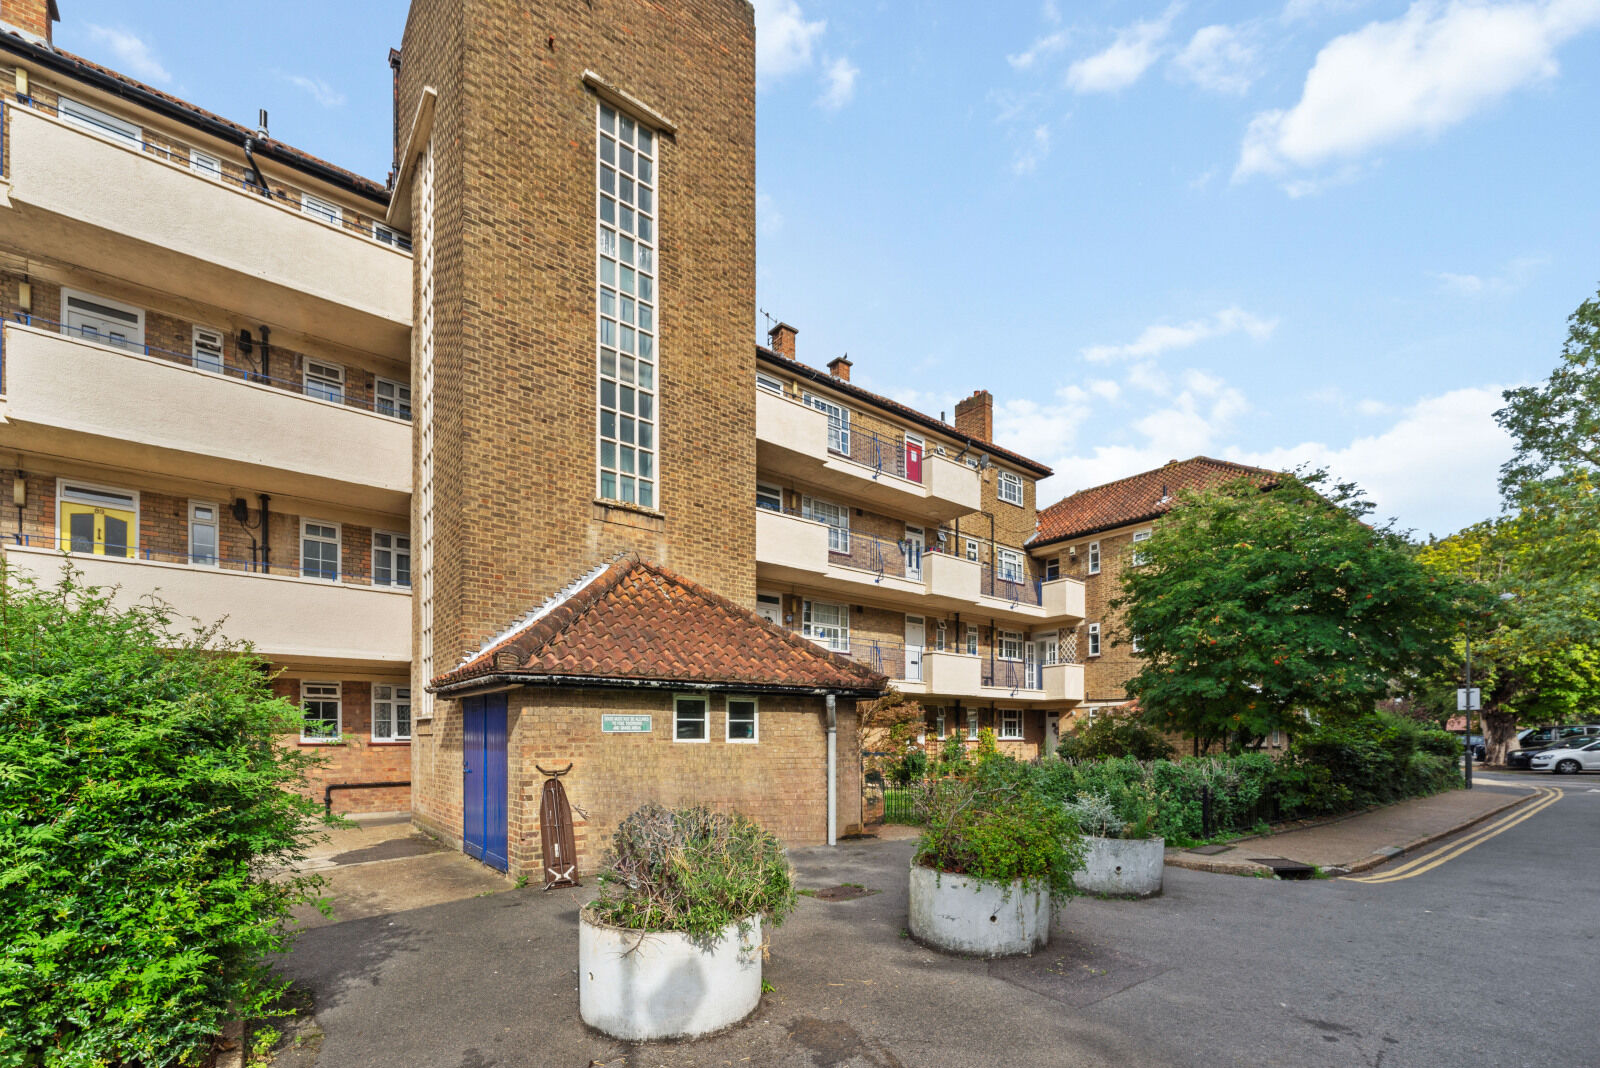 2 bedroom  flat for sale London Road, Mitcham, CR4, main image